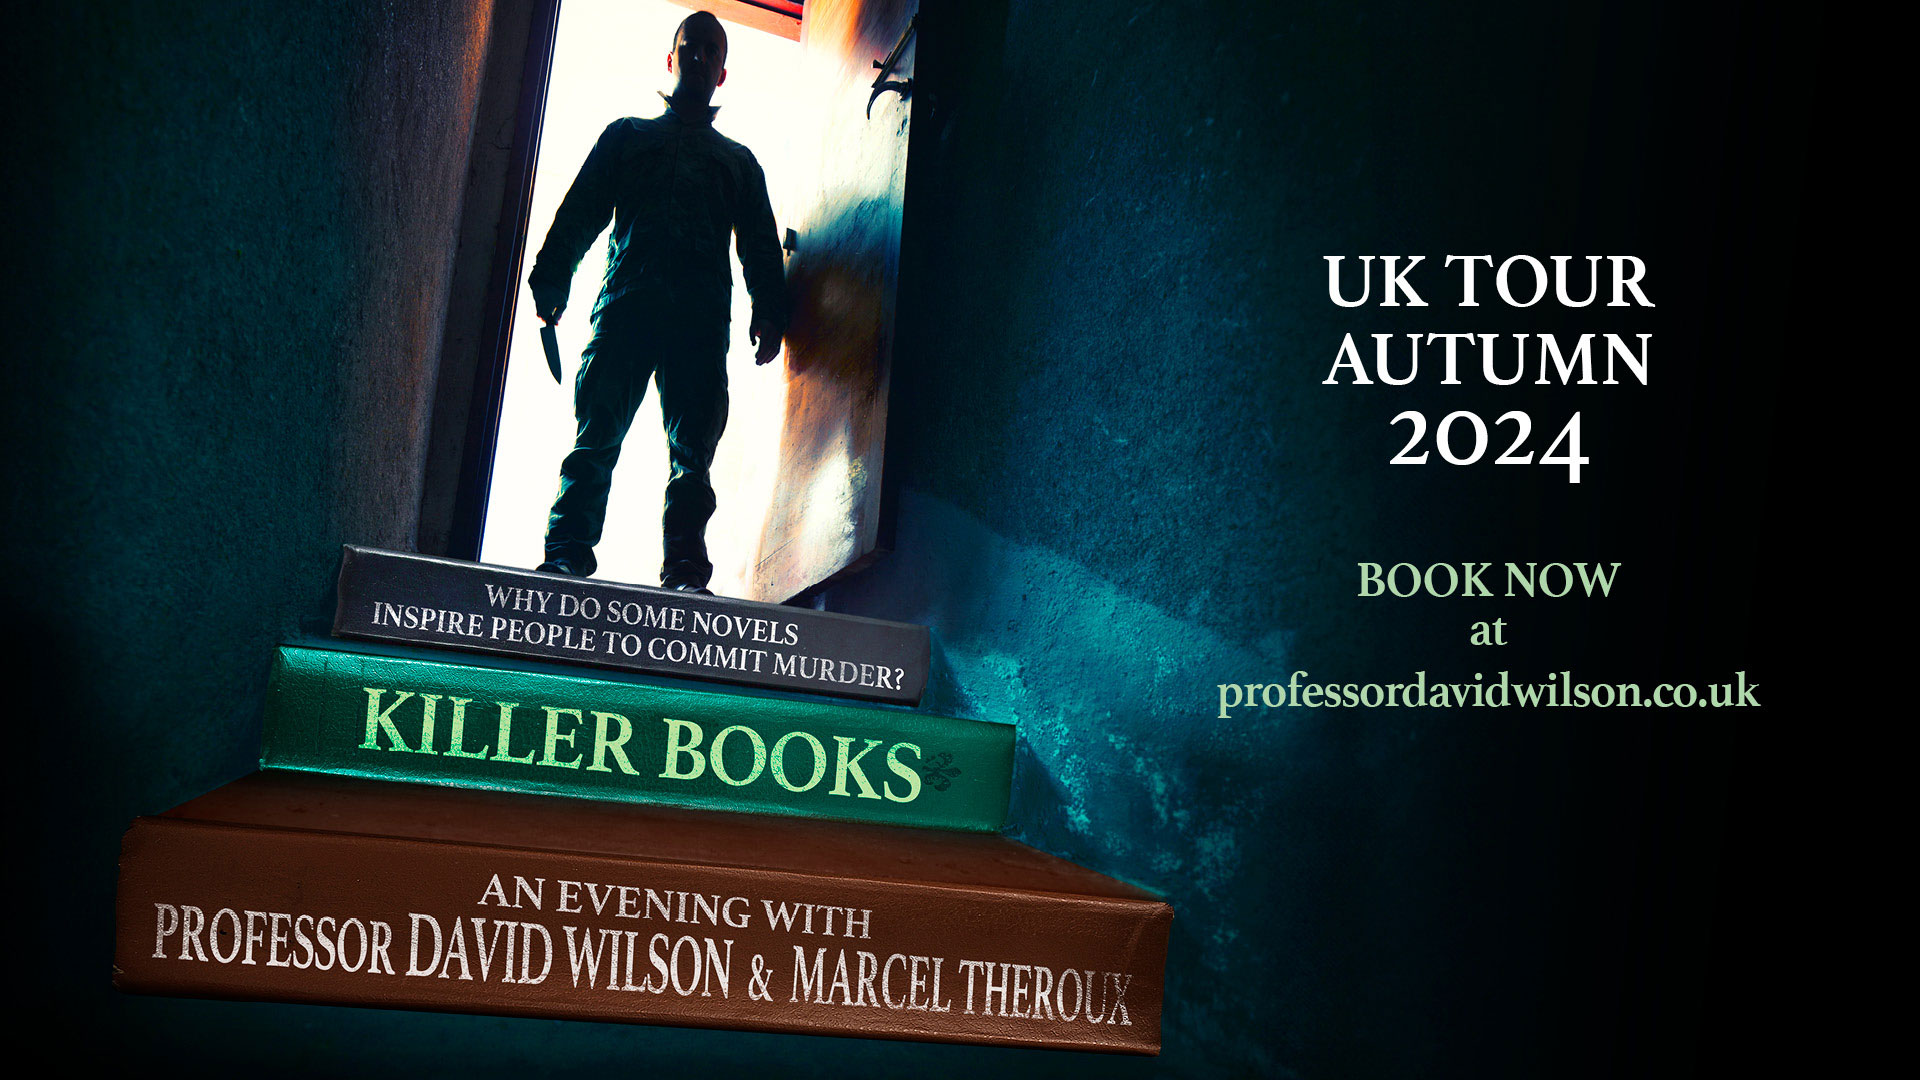 Killer Books – An Evening with Professor David Wilson and Marcel Theroux